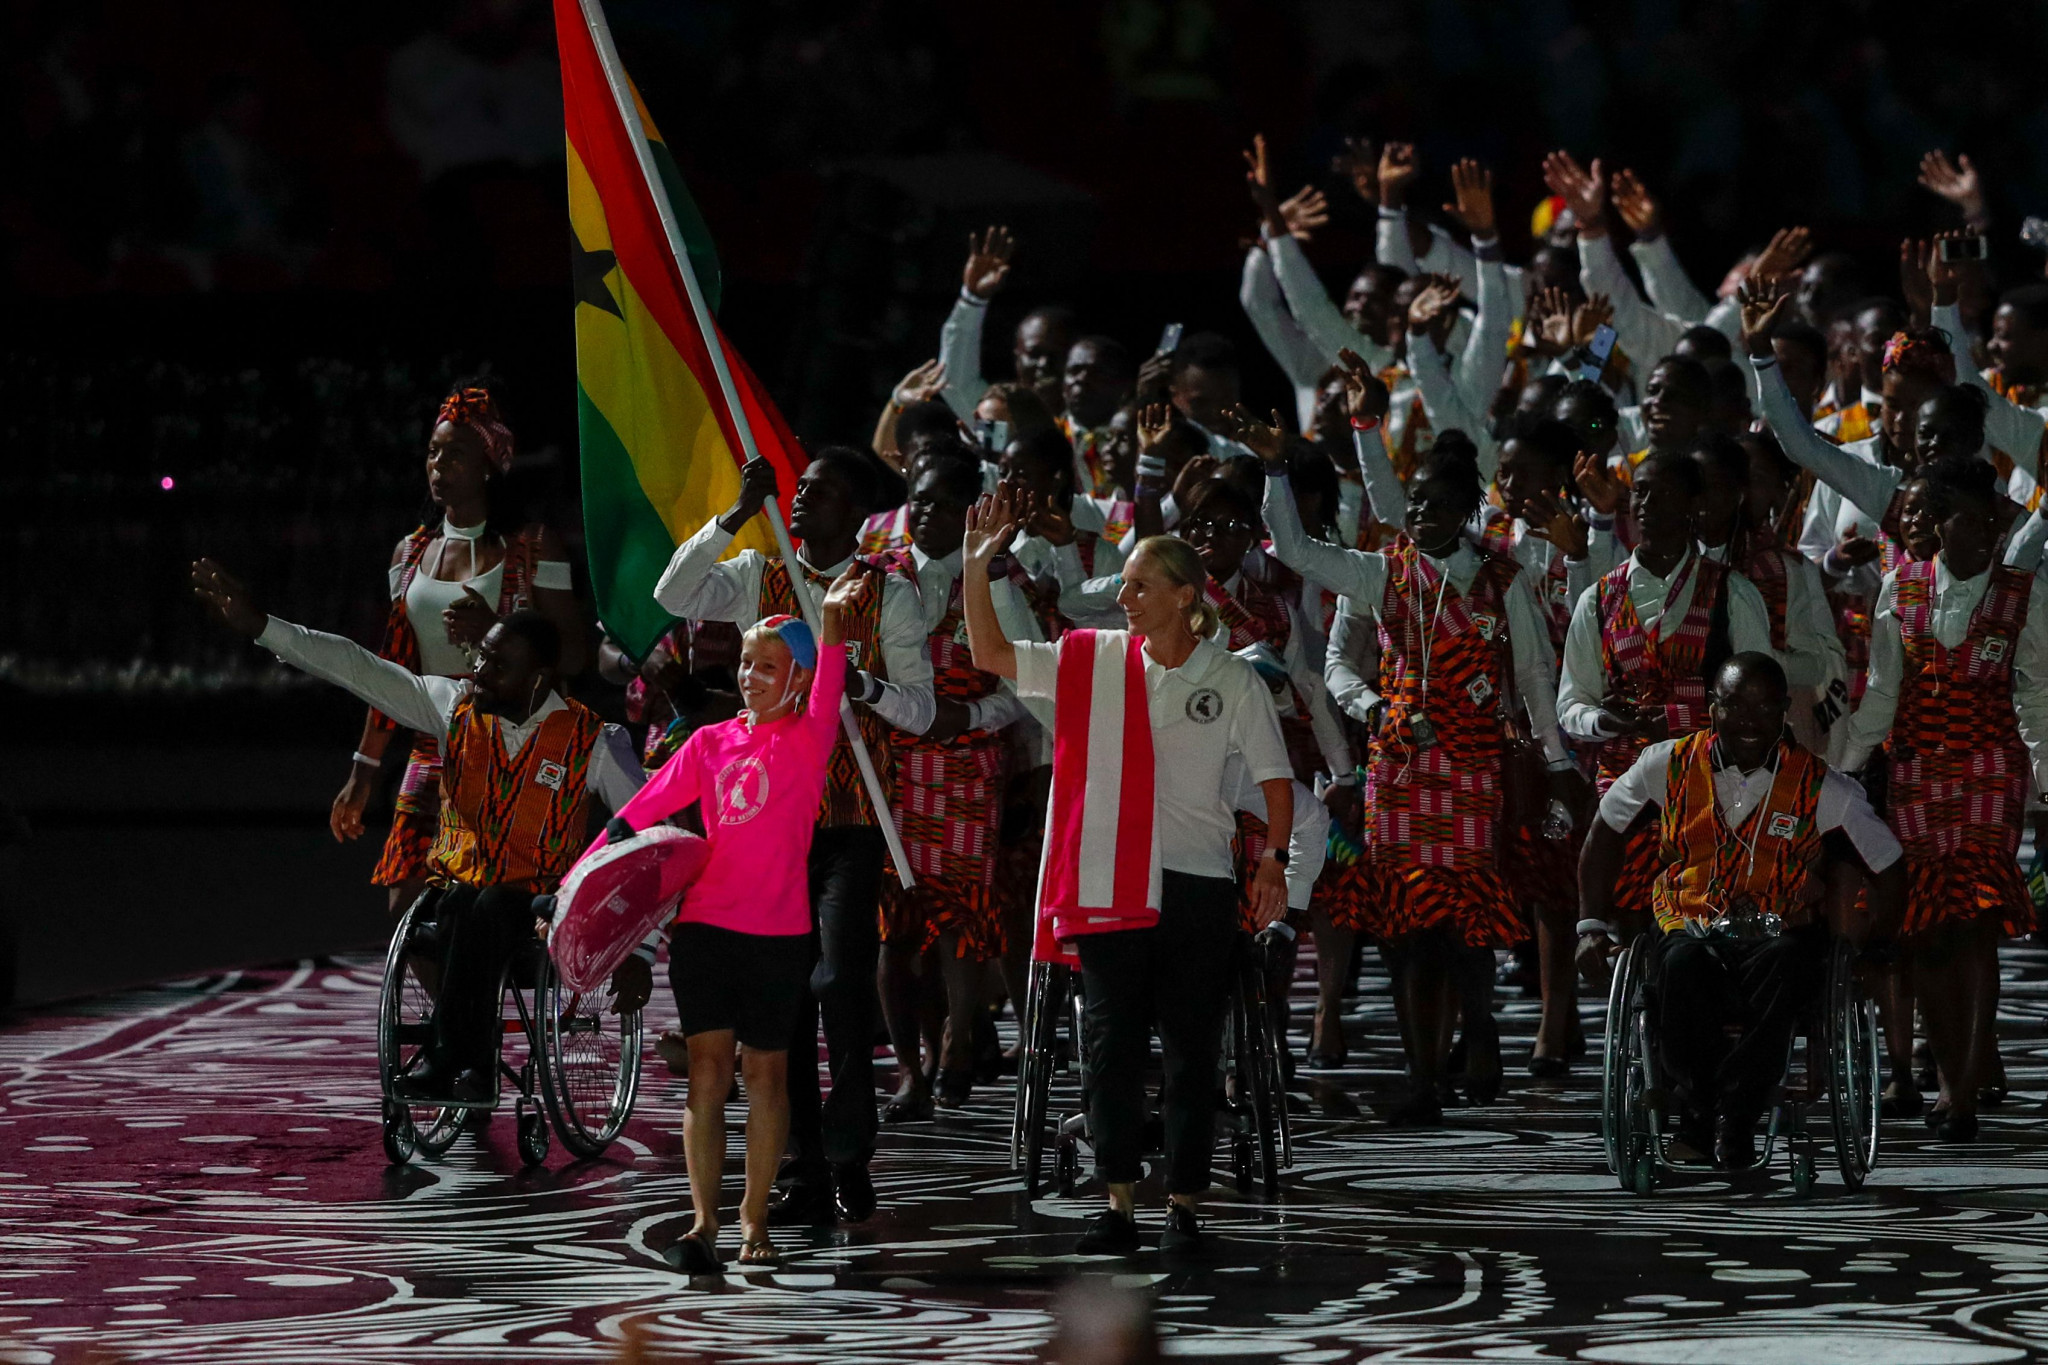 Ghana Olympic Committee to discuss report on Gold Coast 2018 conduct after visa allegations